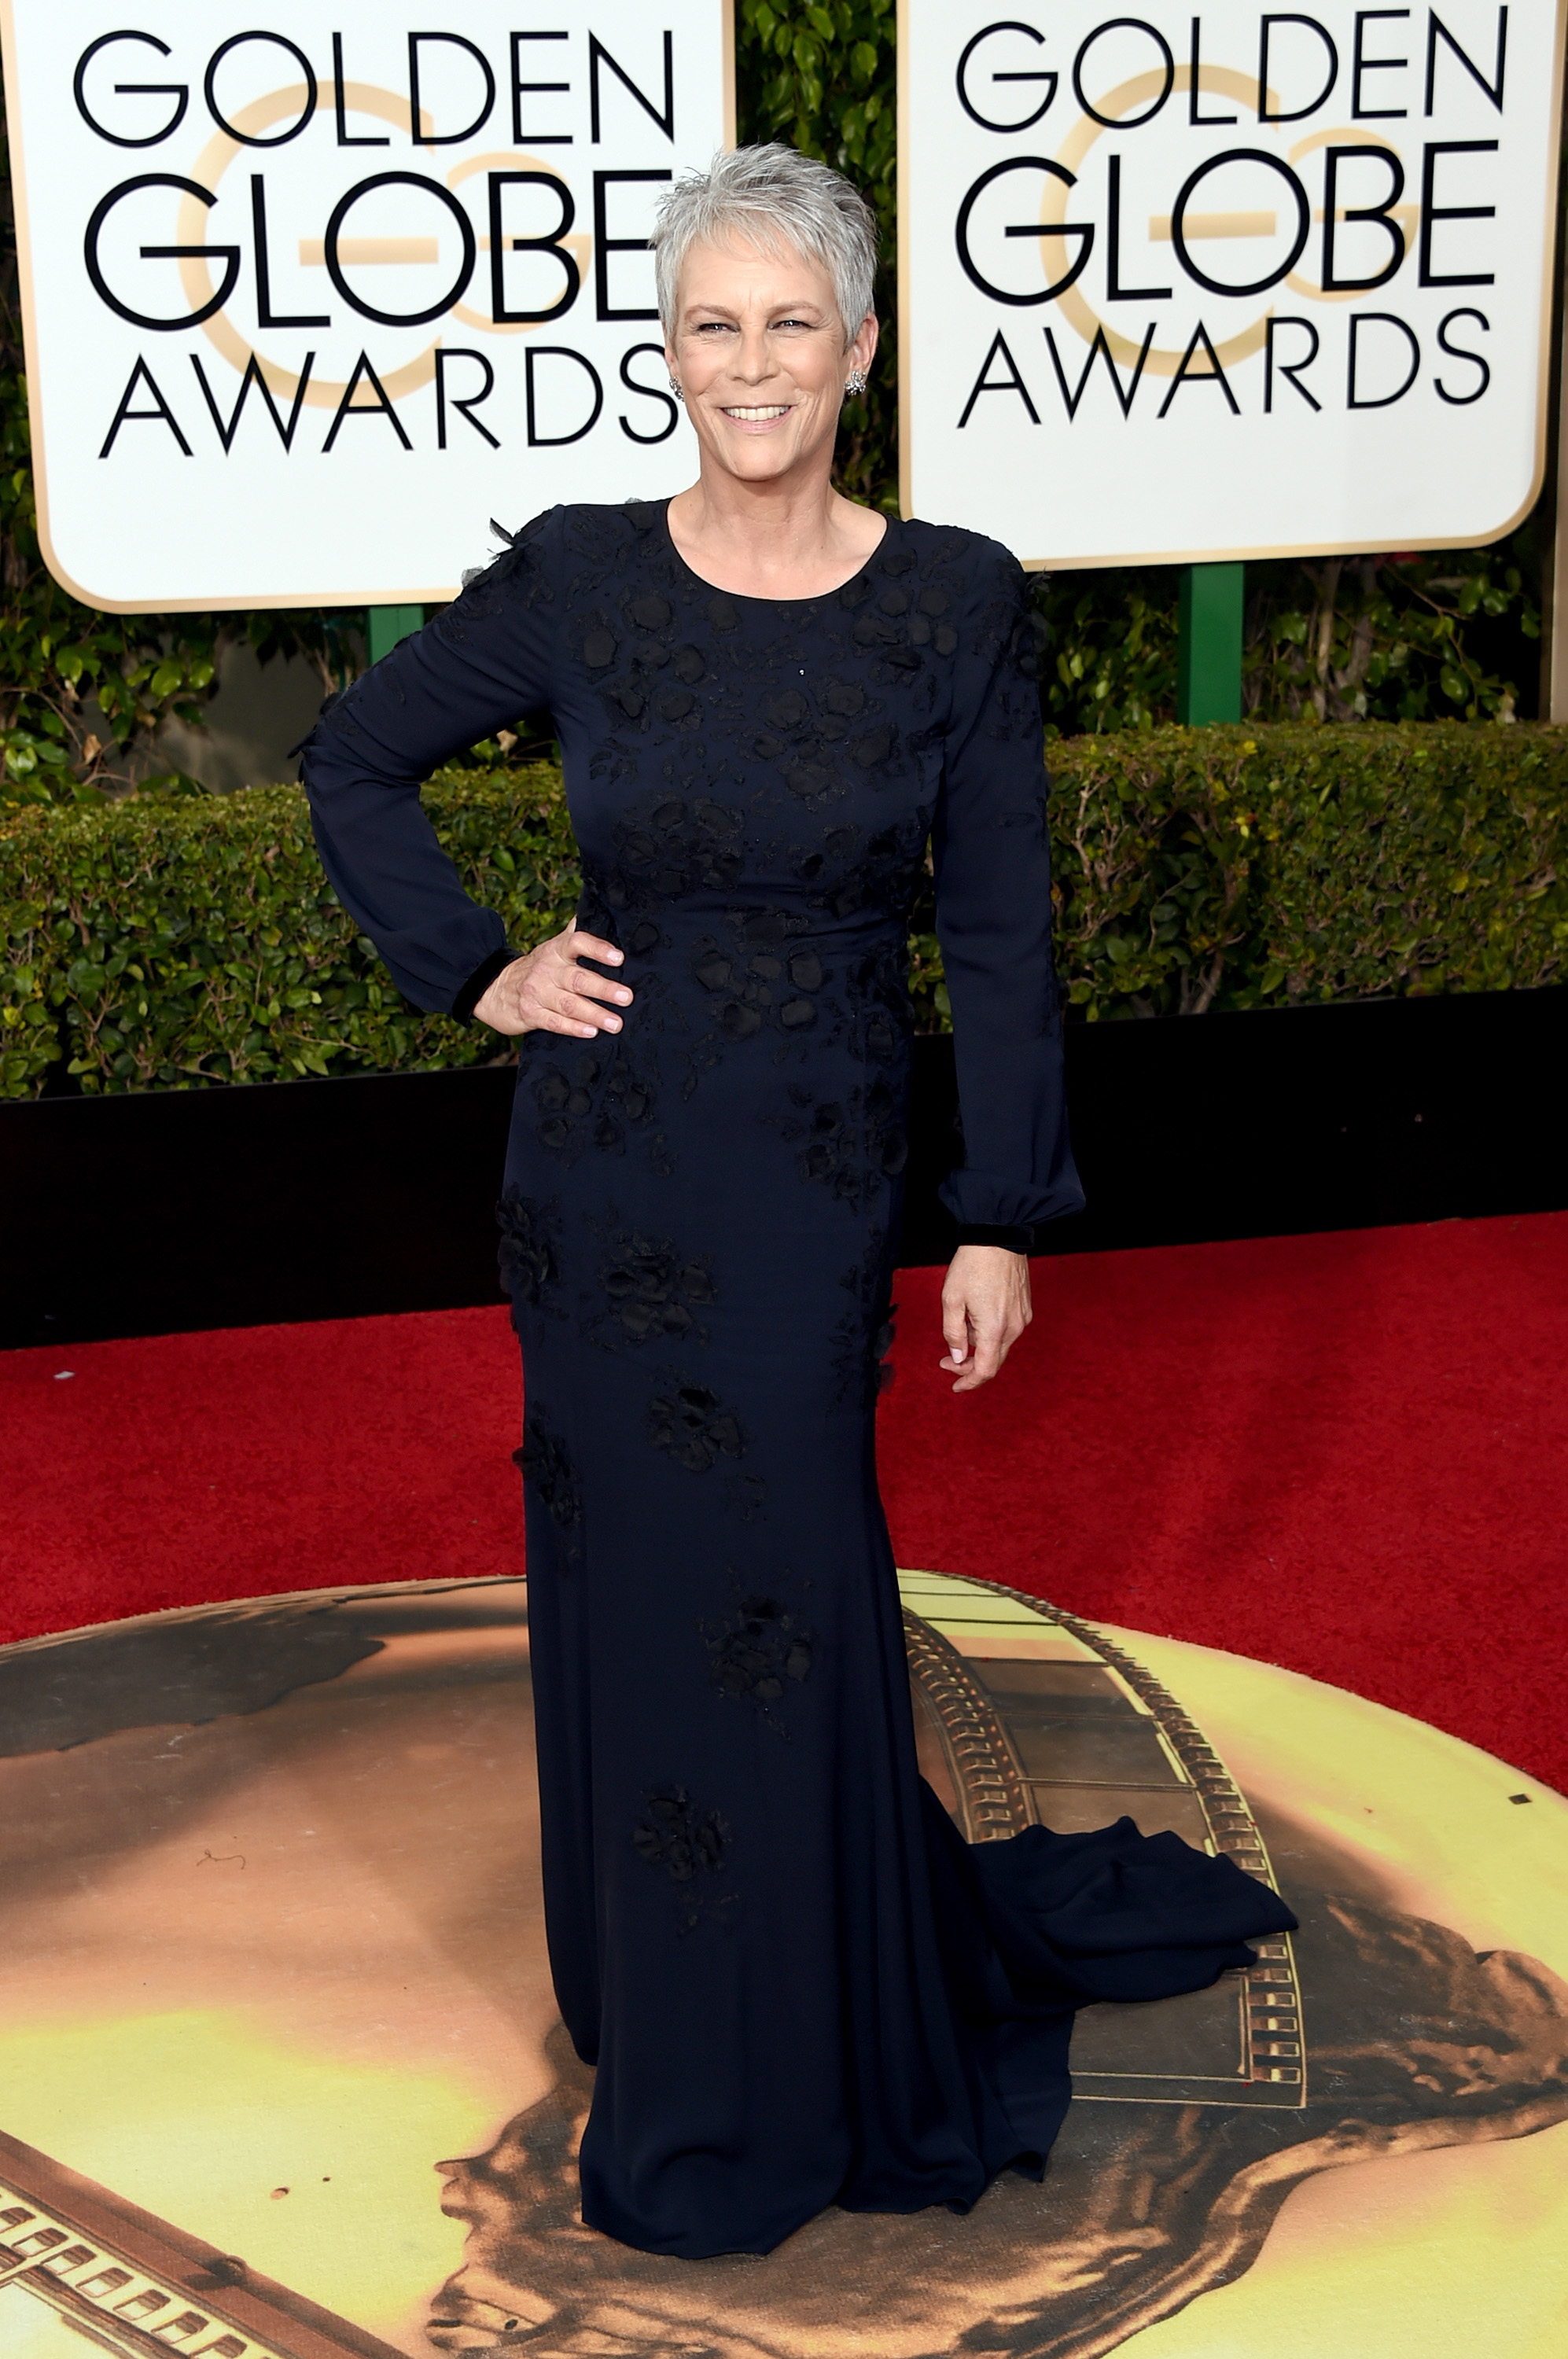 Jamie Lee Curtis arrives to the 73rd Annual Golden Globe Awards on Jan. 10, 2016 in Beverly Hills.